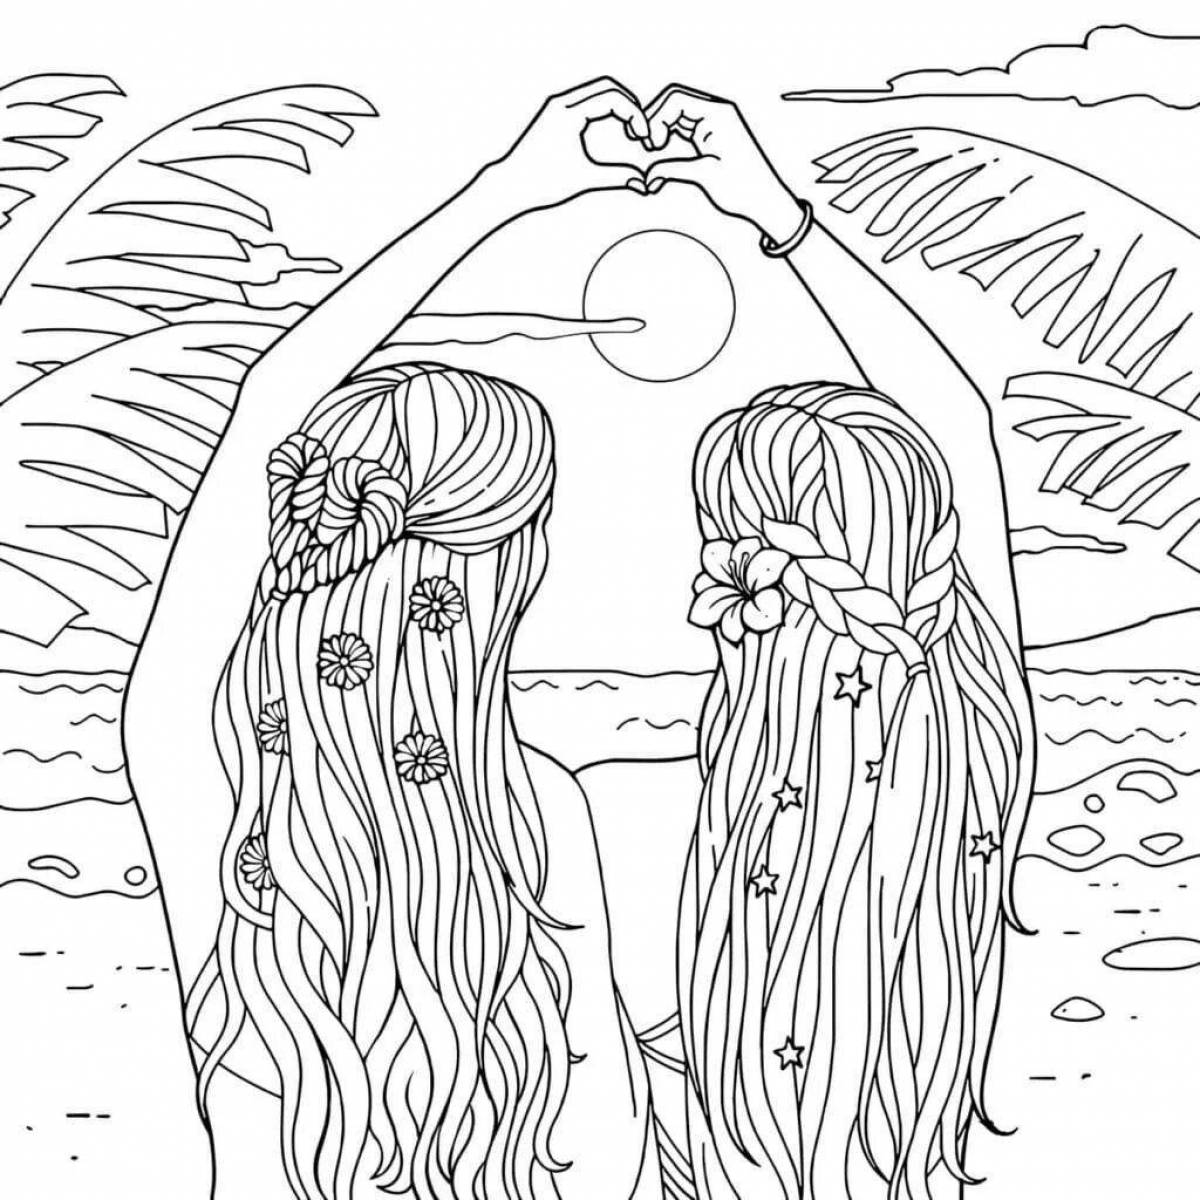 Amazing coloring pages for girls 10-11 years old